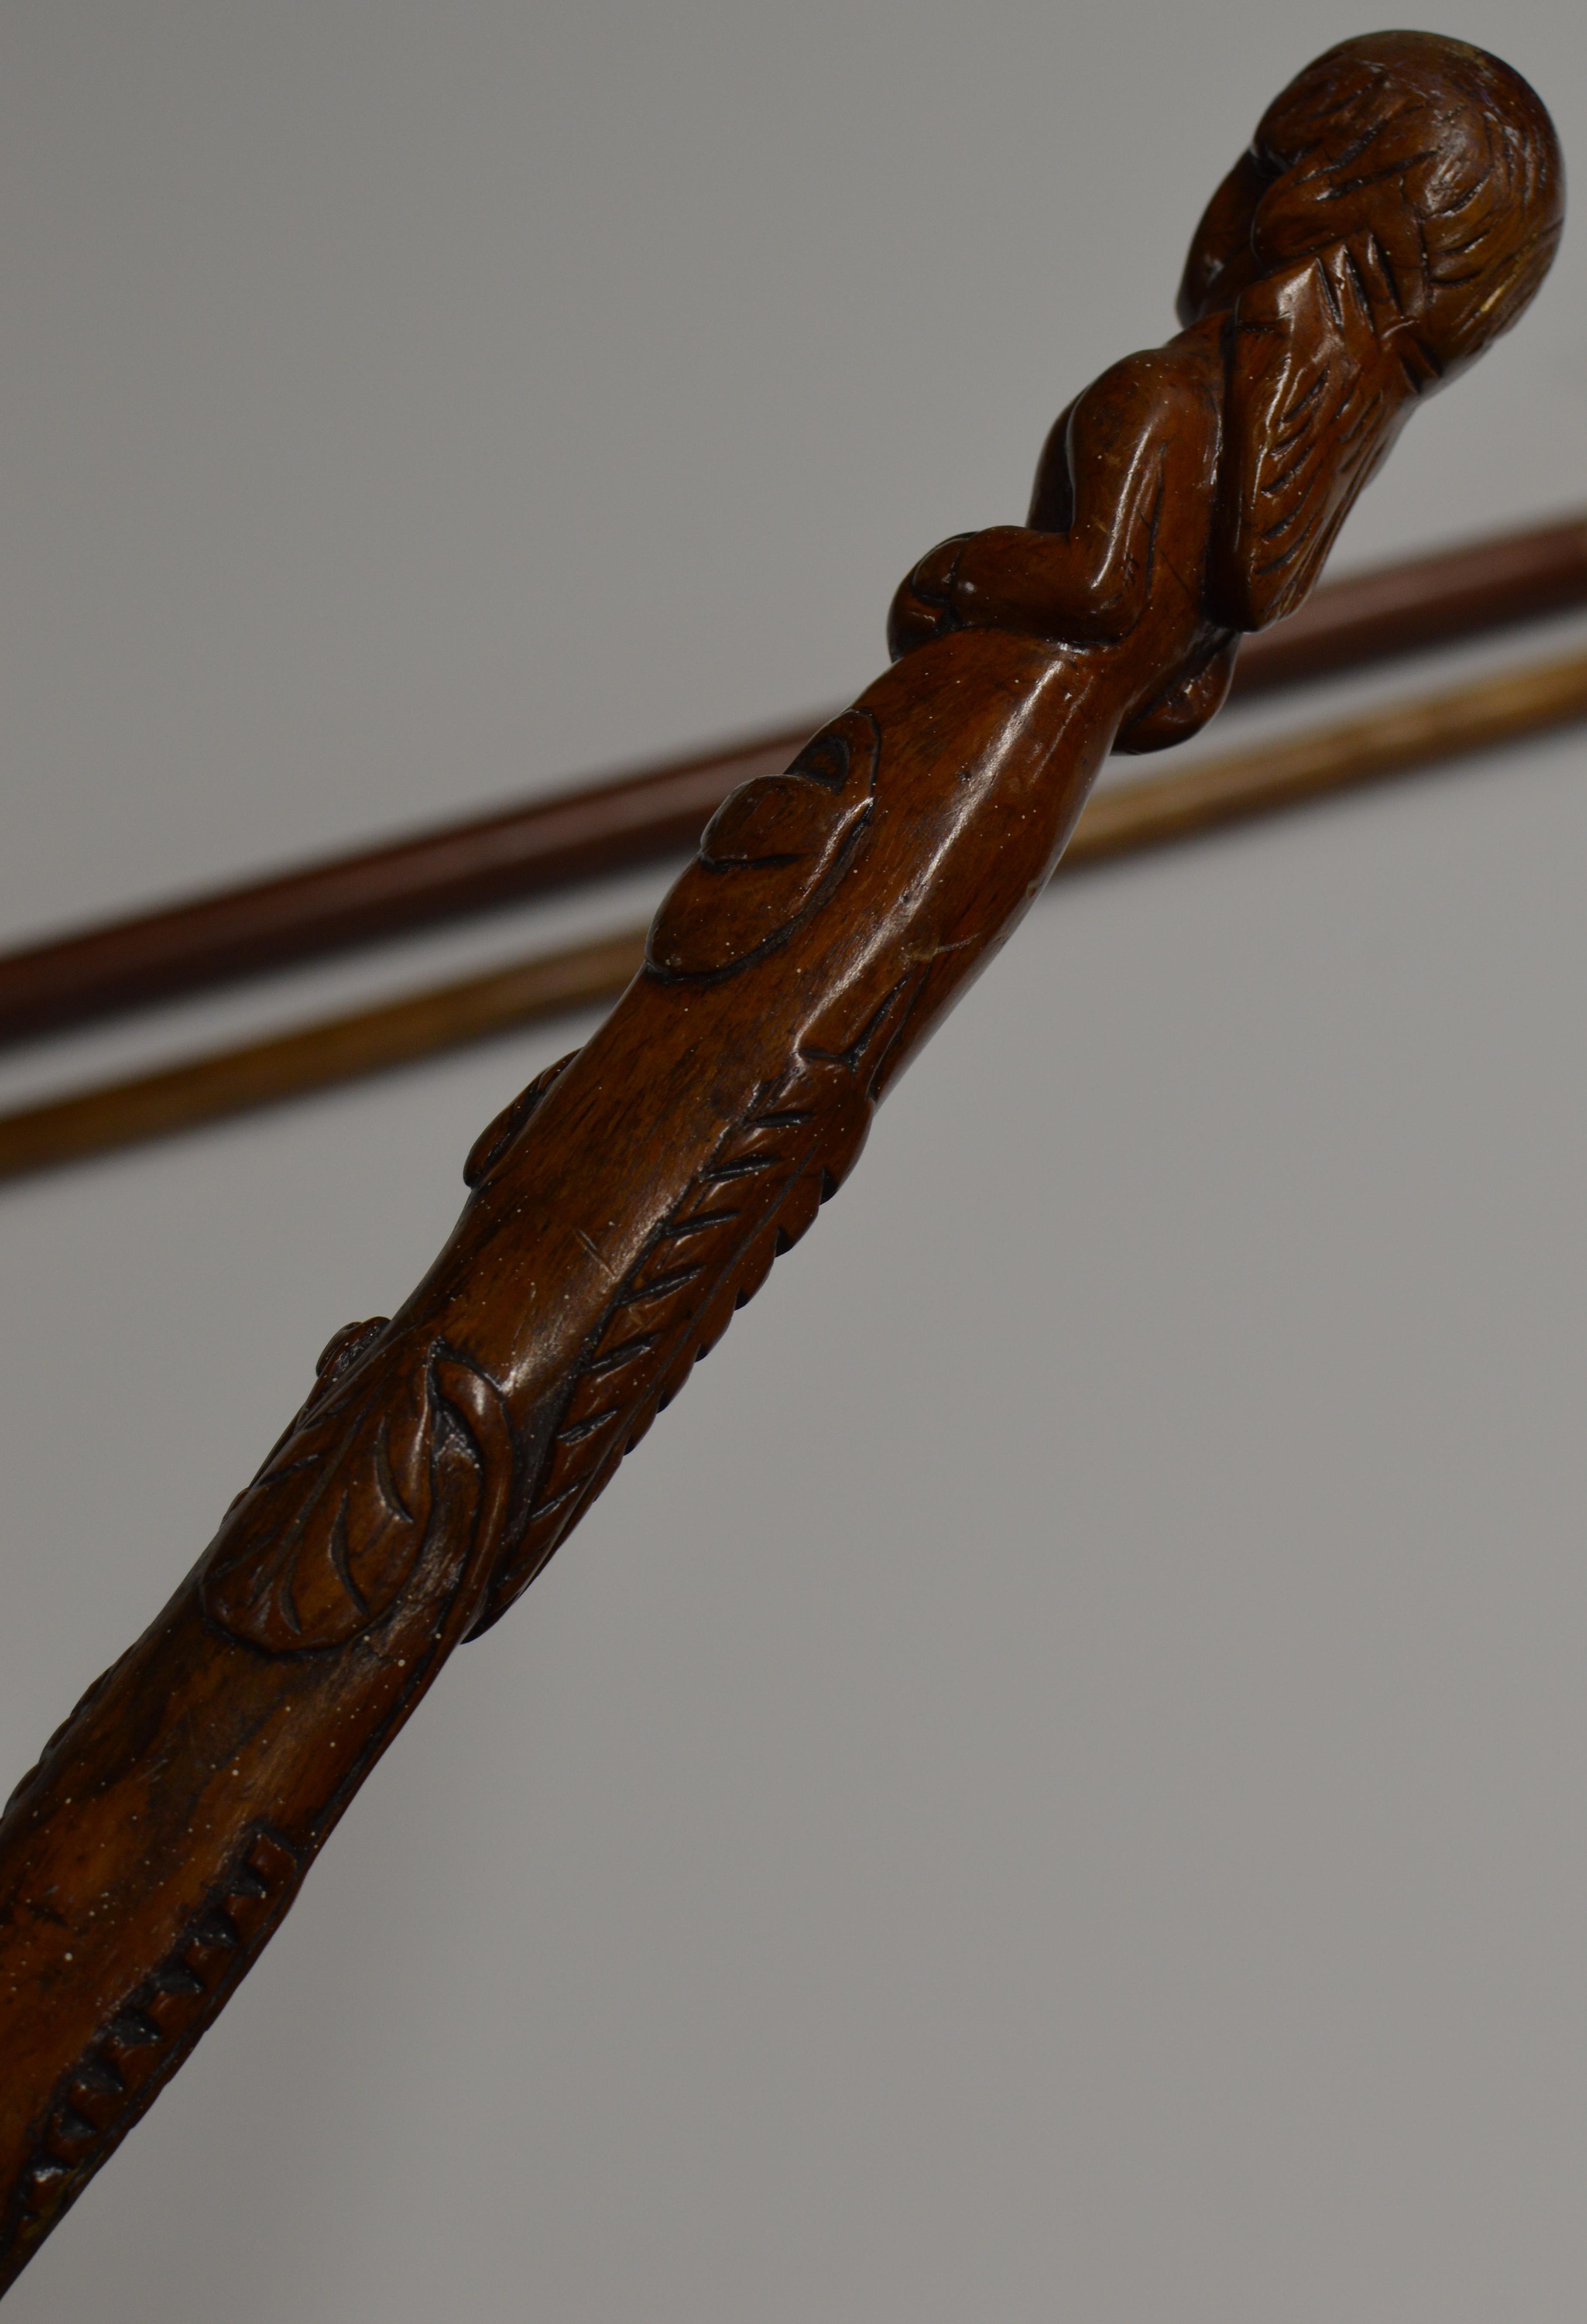 34½" OLD CARVED WOODEN WALKING STICK WITH THE HANDLE MODELLED AS A FEMALE FIGURE WITH OTHER - Image 3 of 8